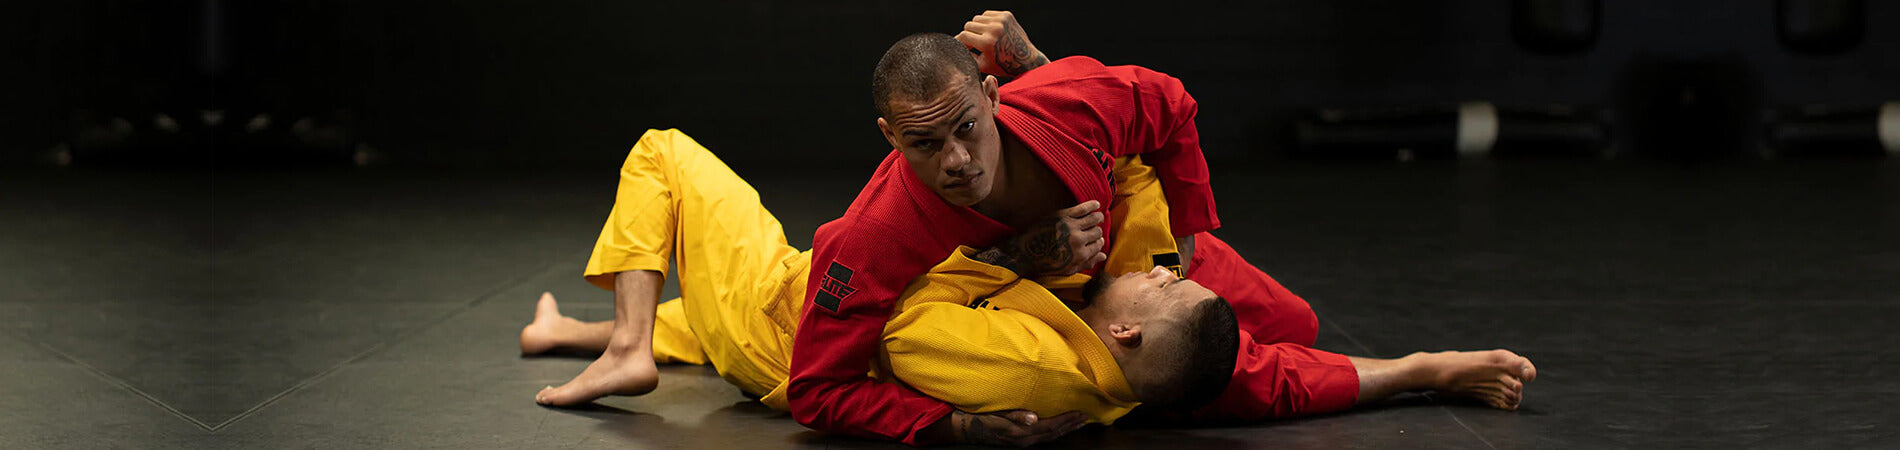 Top 5 Positions for BJJ Beginners